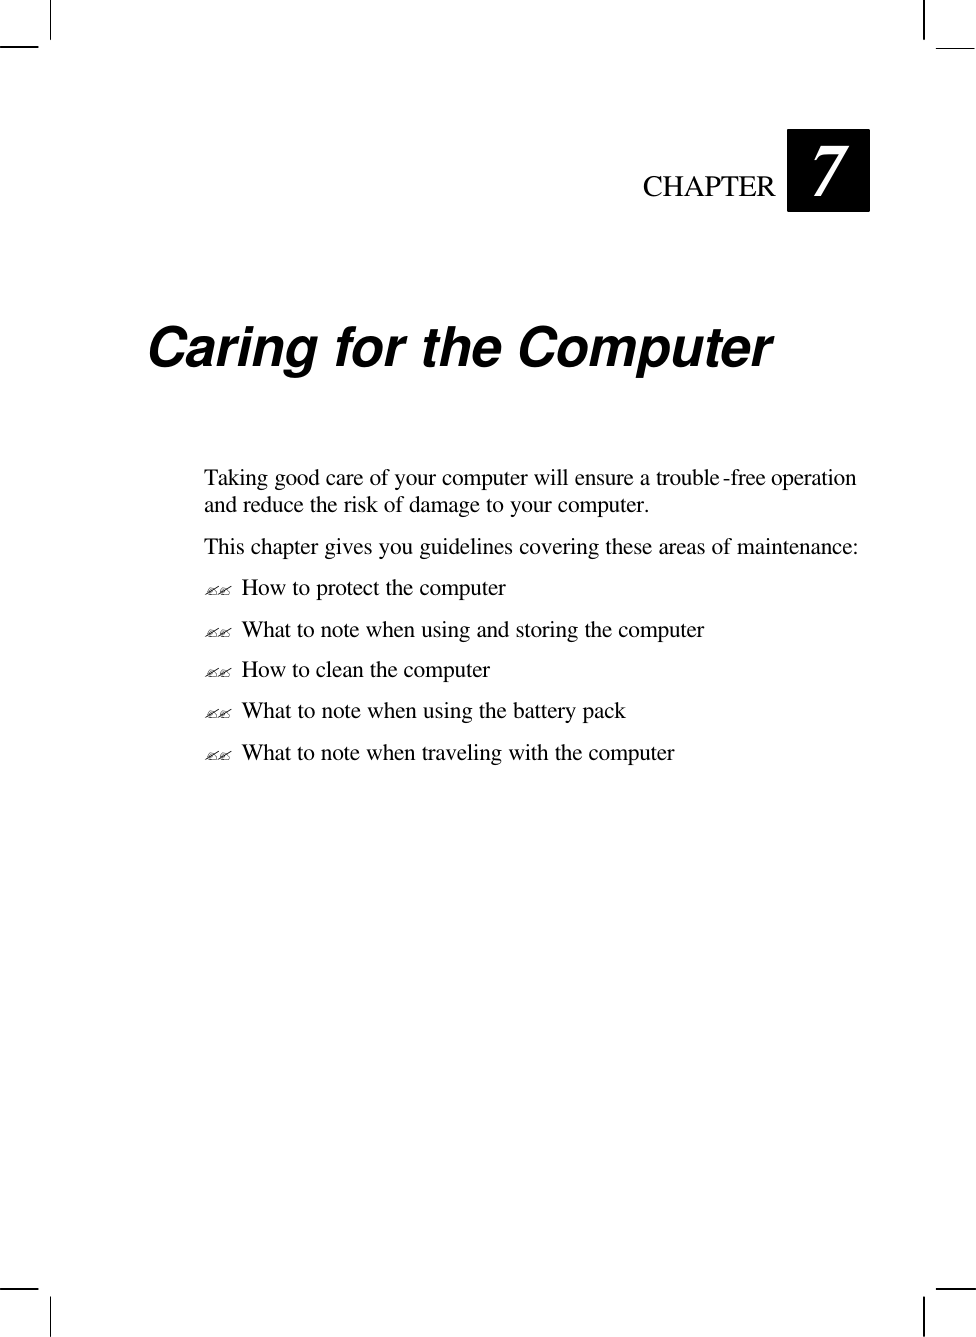   CHAPTER 7 Caring for the Computer Taking good care of your computer will ensure a trouble-free operation and reduce the risk of damage to your computer. This chapter gives you guidelines covering these areas of maintenance: ?? How to protect the computer ?? What to note when using and storing the computer ?? How to clean the computer ?? What to note when using the battery pack ?? What to note when traveling with the computer 